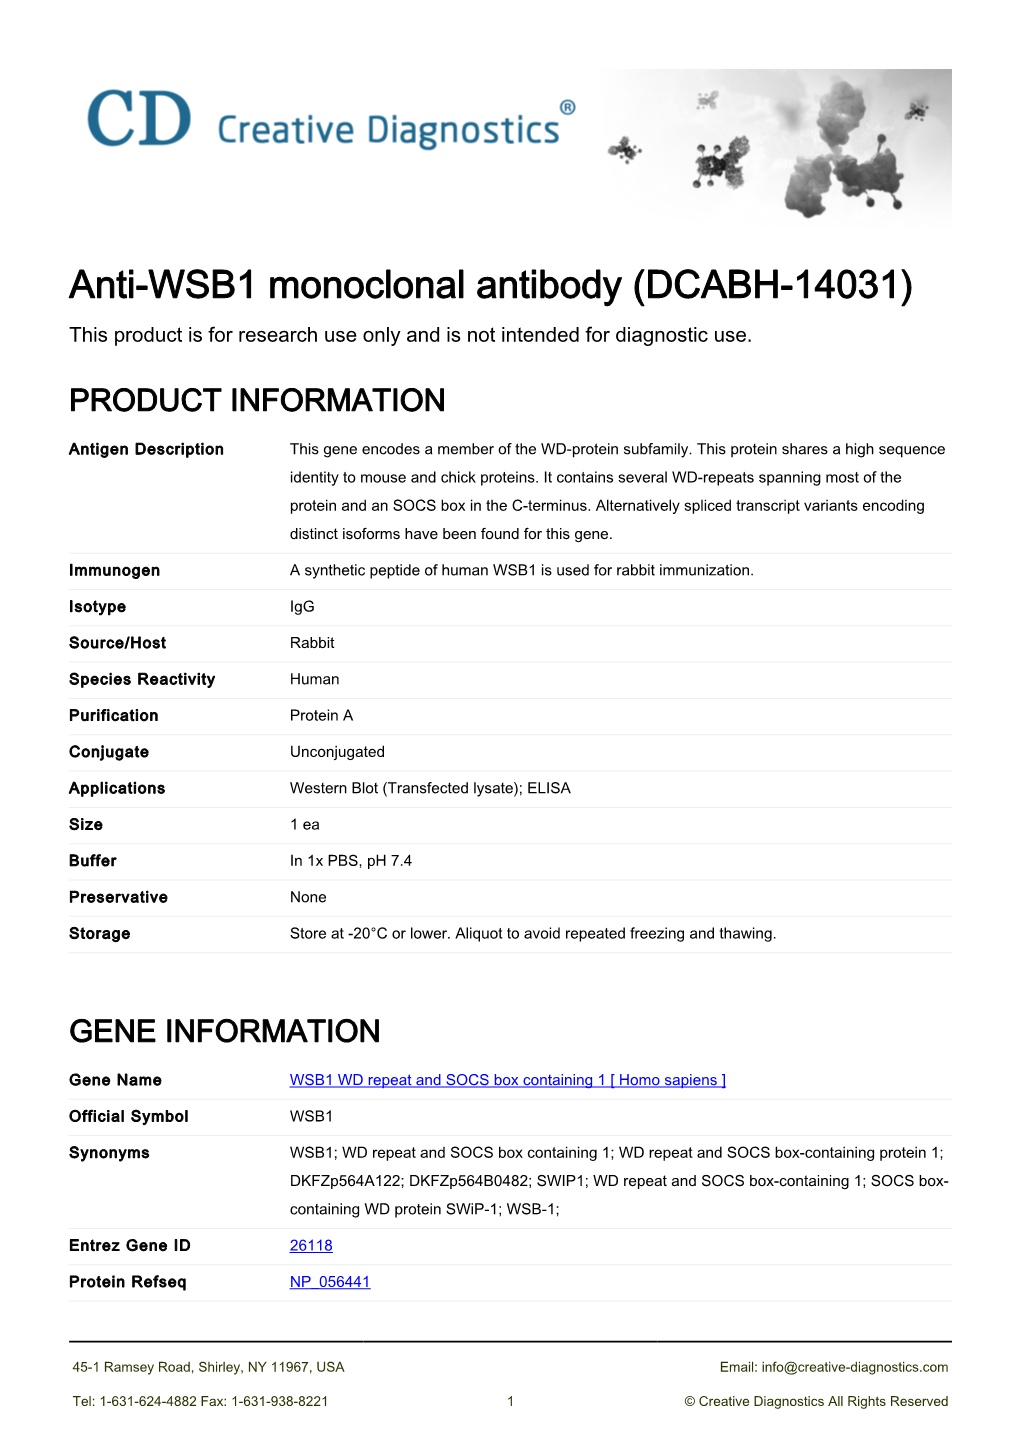 Anti-WSB1 Monoclonal Antibody (DCABH-14031) This Product Is for Research Use Only and Is Not Intended for Diagnostic Use